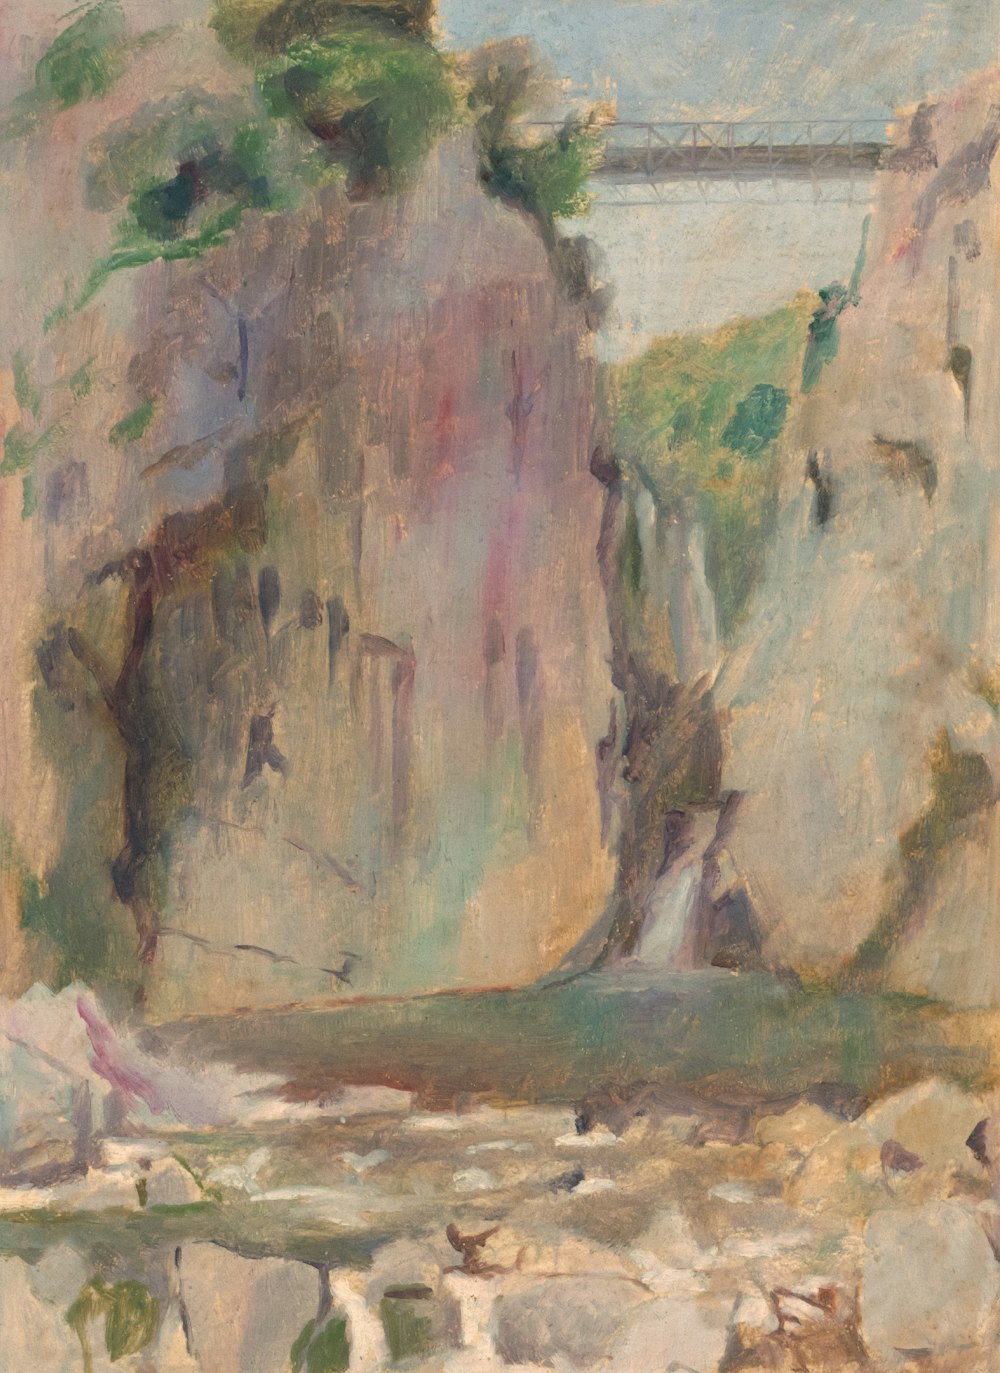 a painting of a waterfall with a bridge in the background